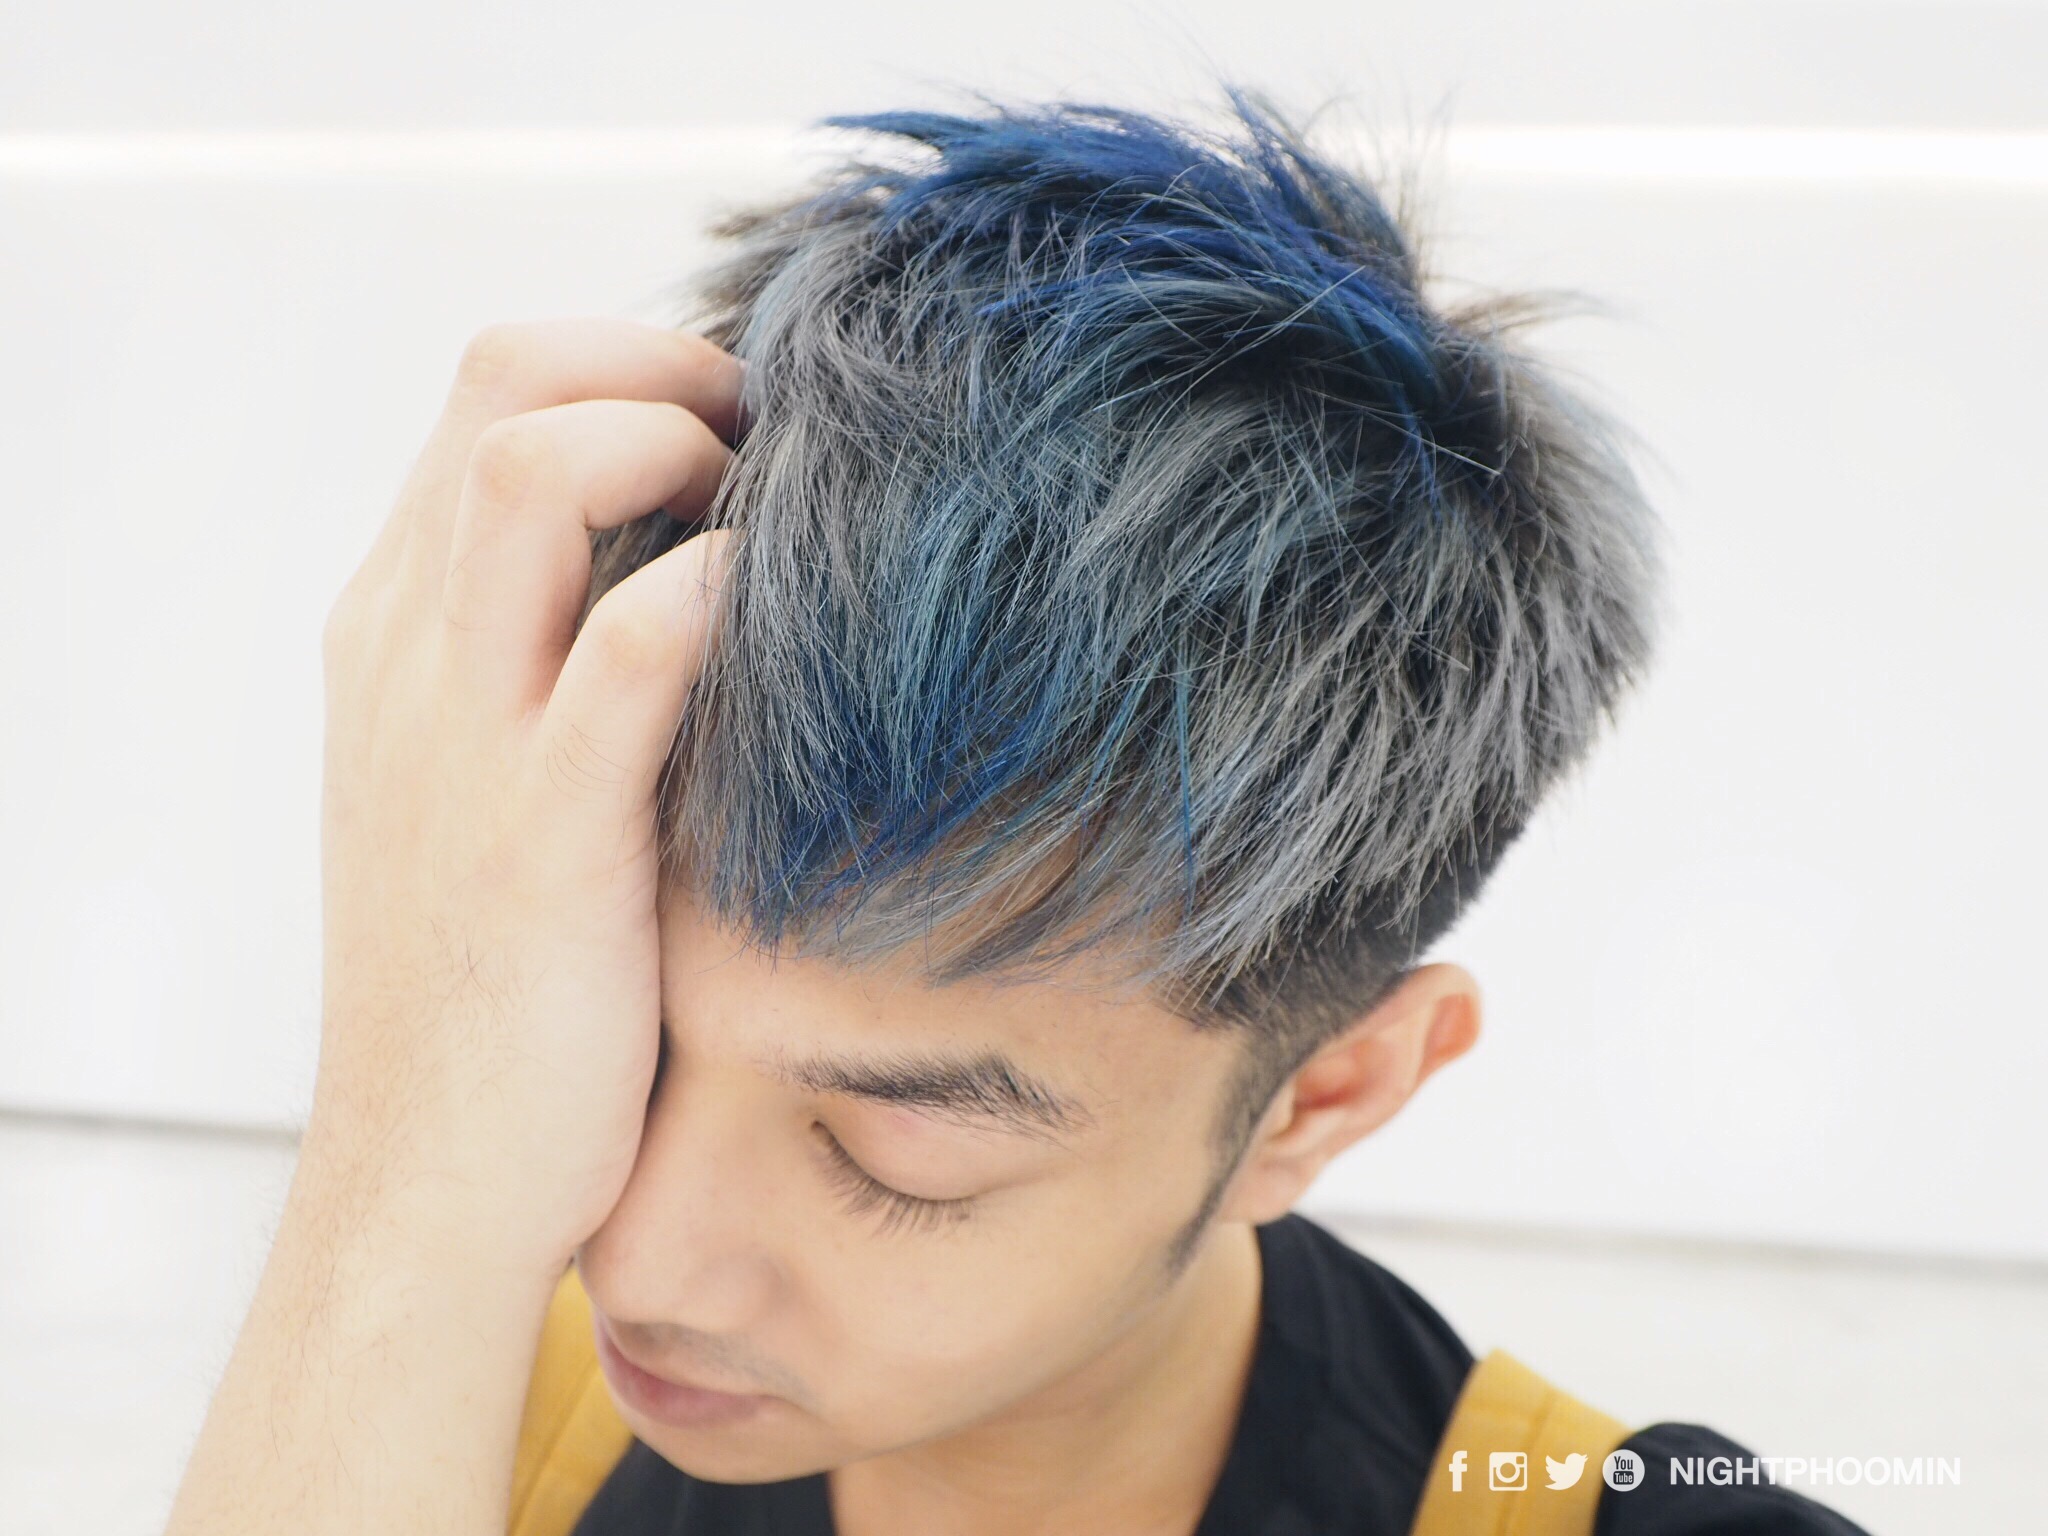 1. How to Mix Silver and Blue Hair Dye for a Stunning Look - wide 4